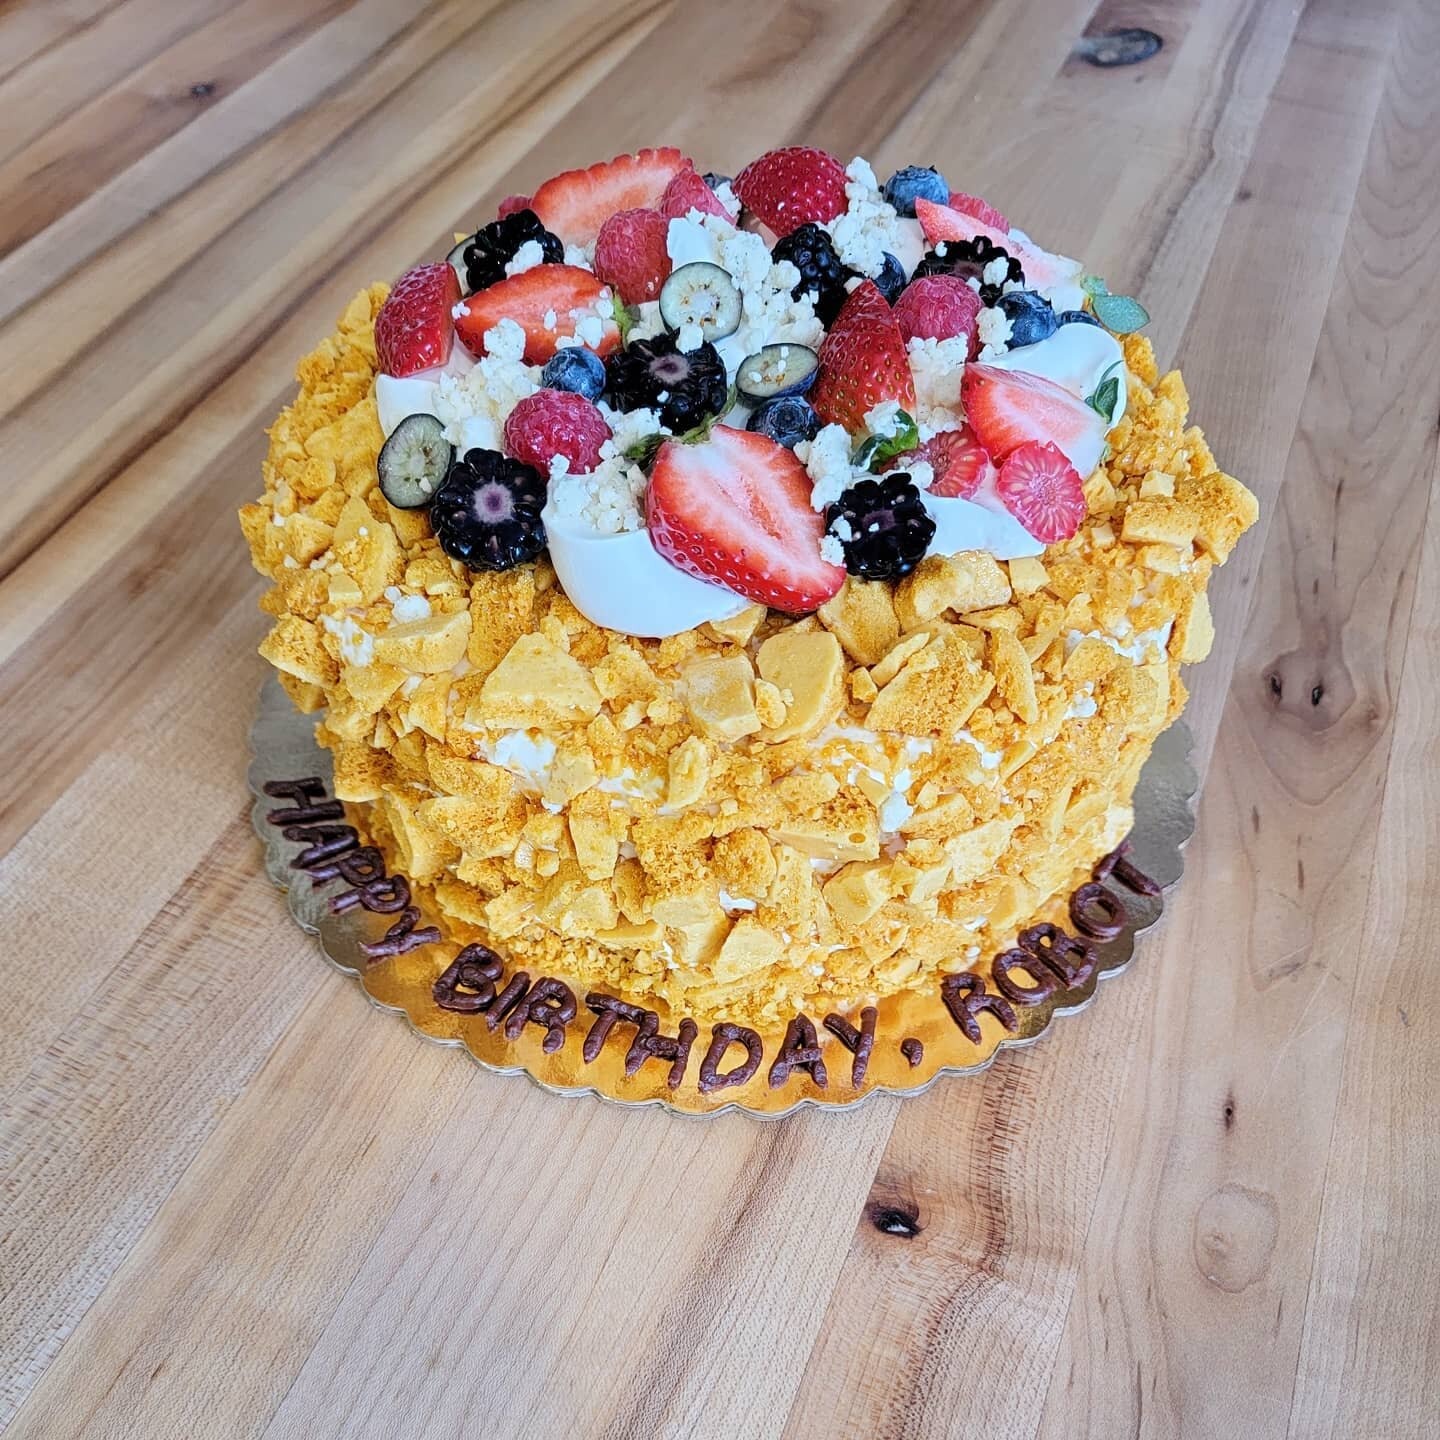 See everyone who ordered our roll cake special tomorrow! We'll be taking a break 4th of July weekend. So our regular pastry pick up will be back the following week~

📸 : A take on Blum's coffee crunch cake.. Without the coffee, honey instead! With m